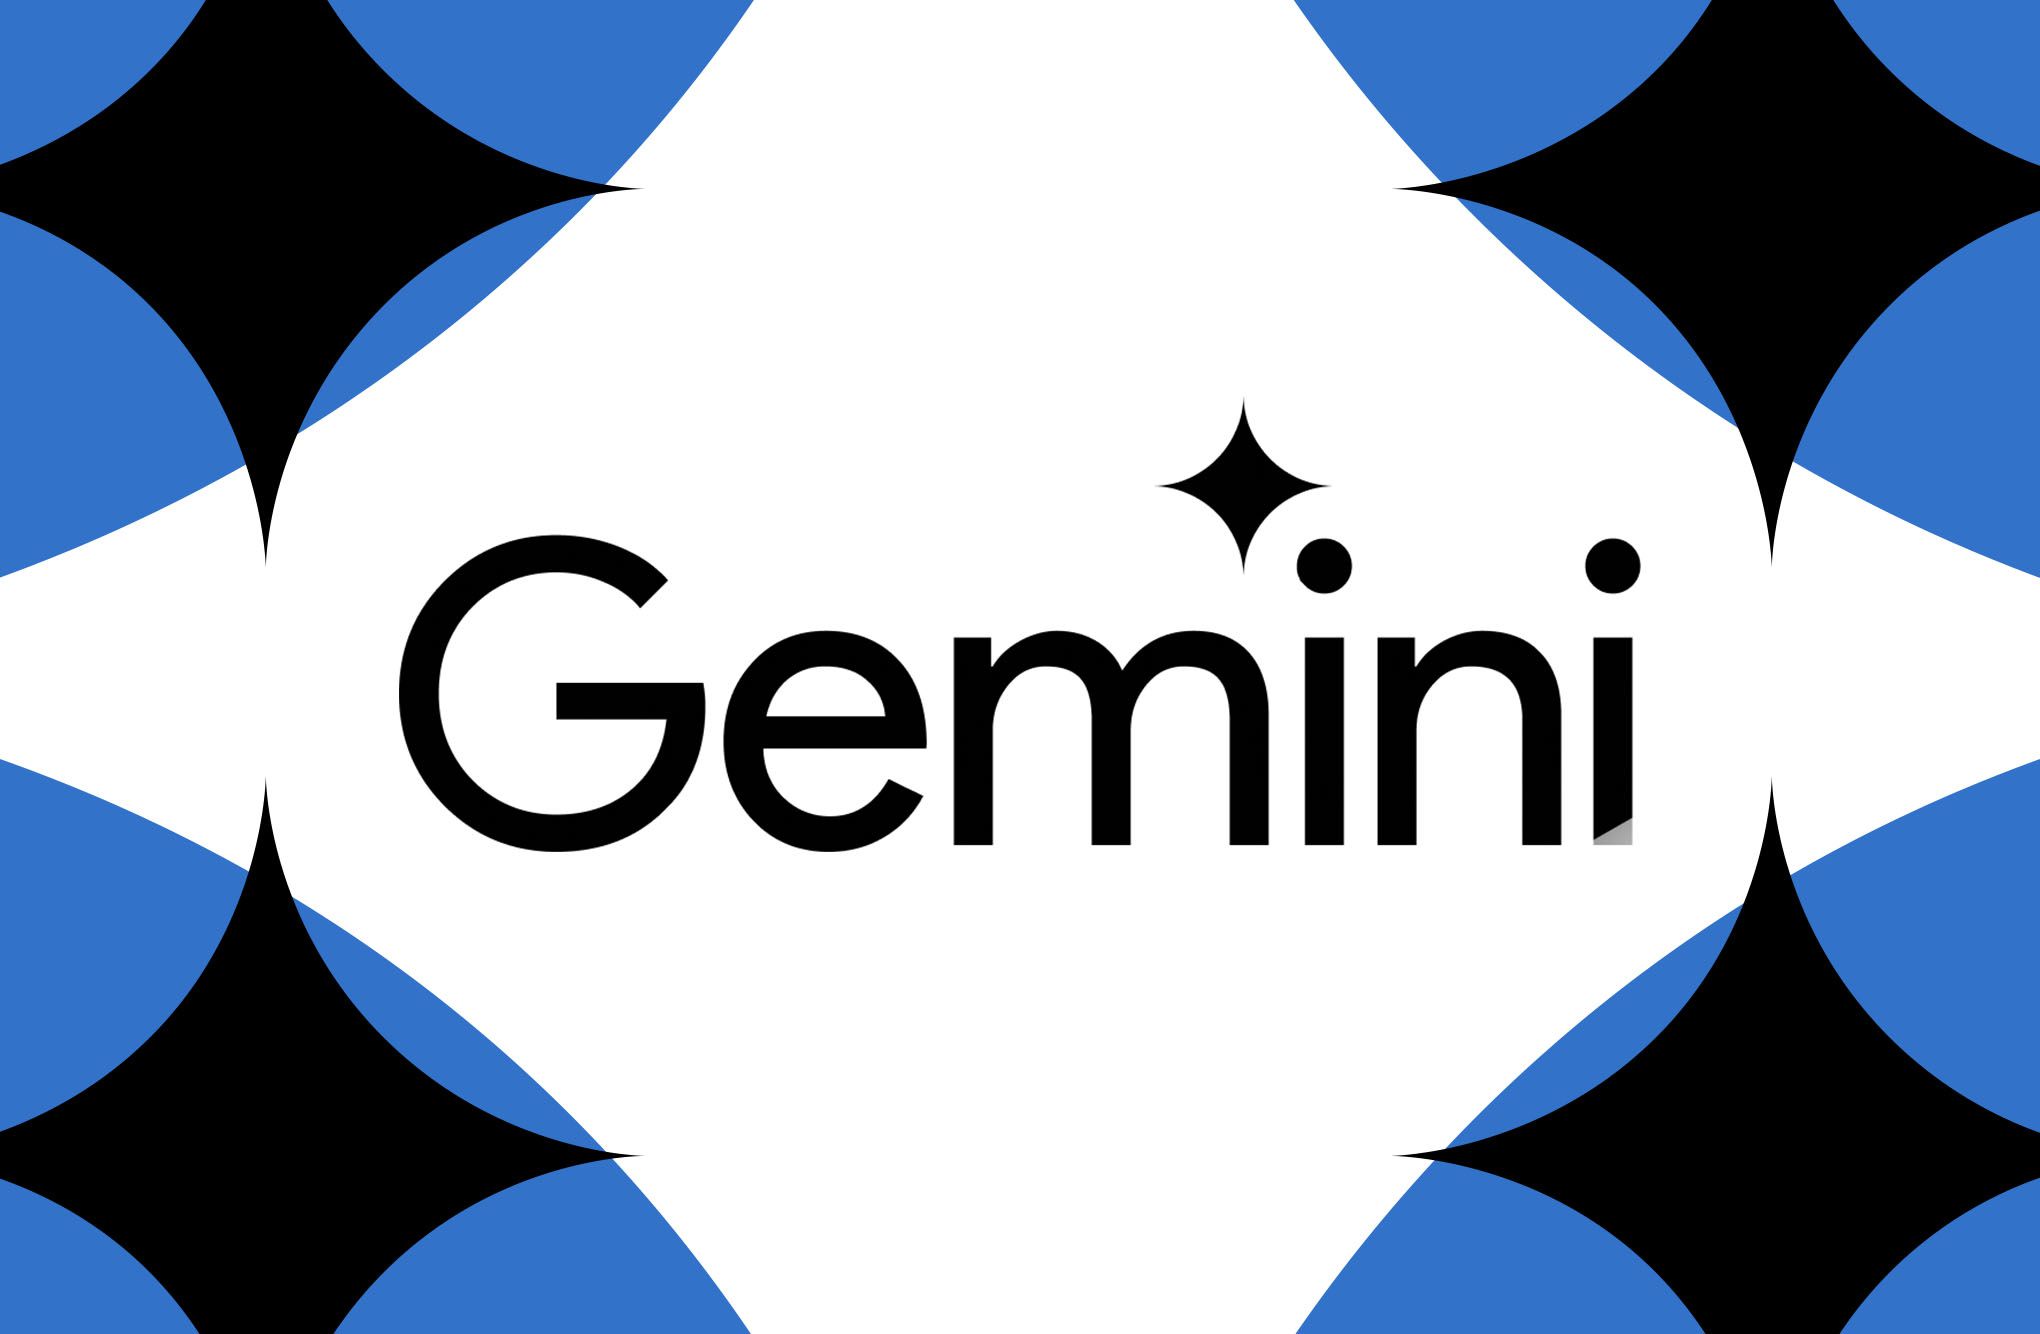 Google introduces Gemini to Messages and adds AI text summaries to Android Auto.